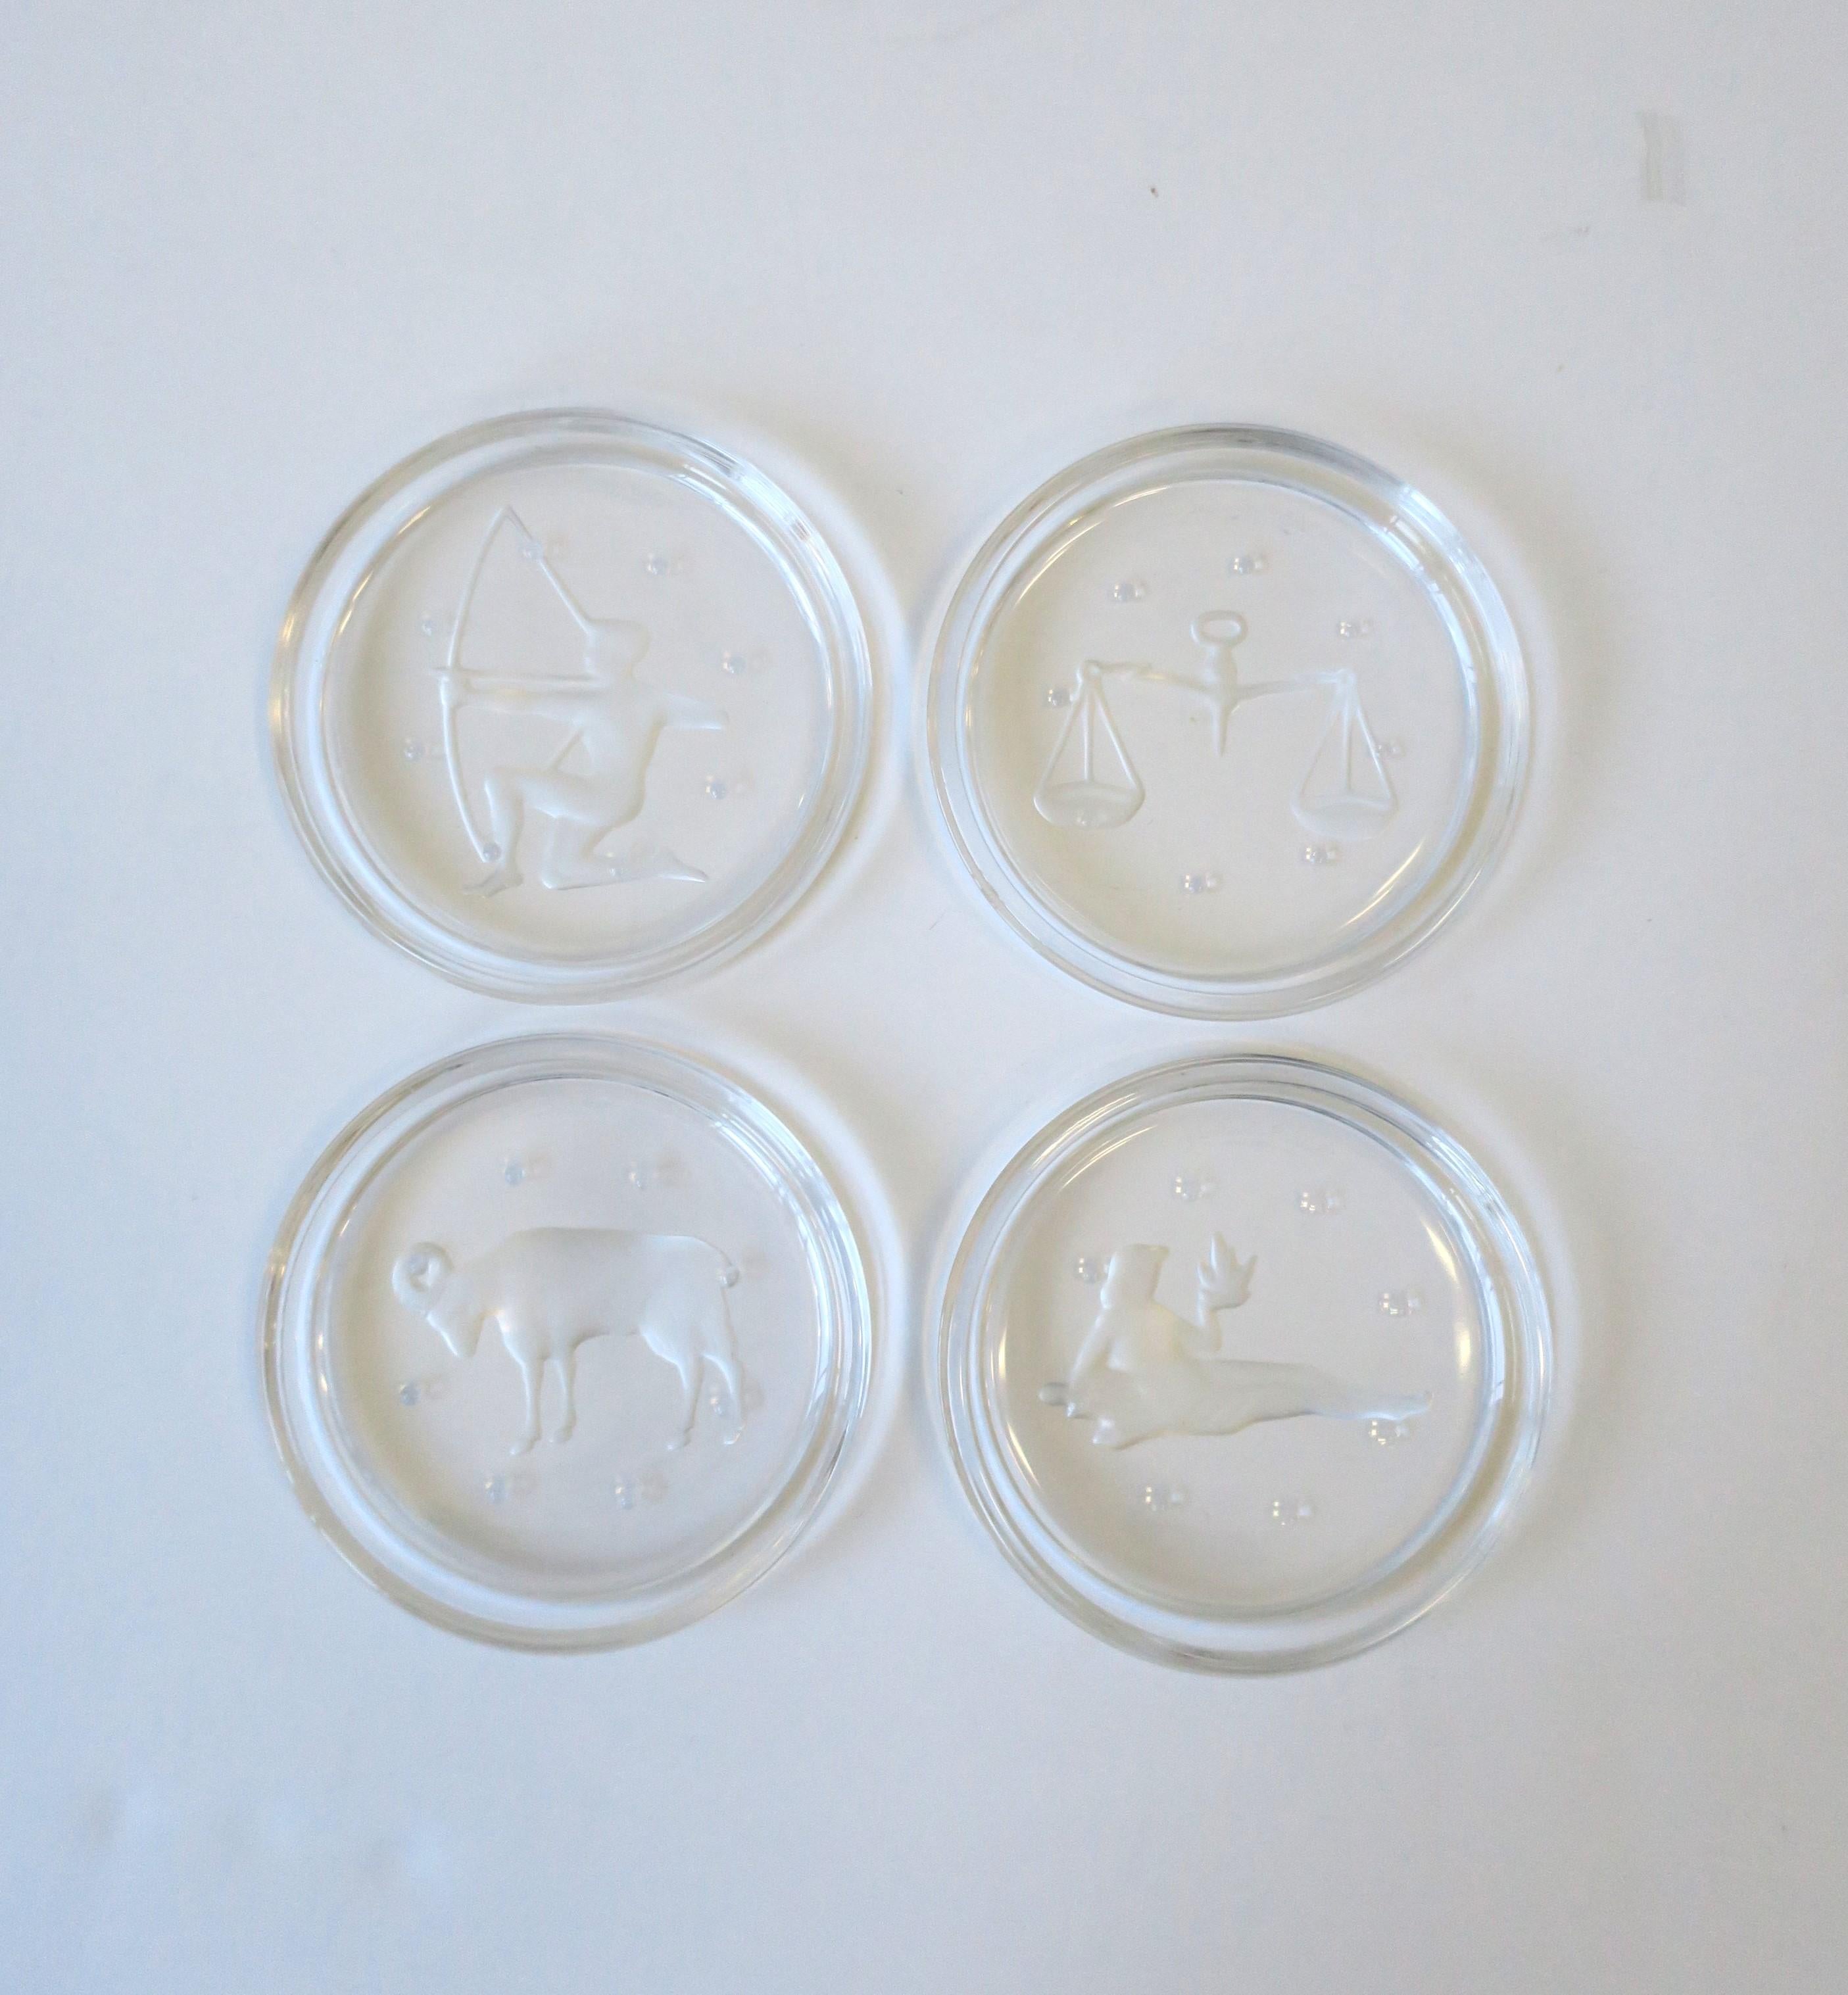 A set four (4) etched Belgian coasters depicting signs of the zodiac and other from luxury crystal Maison Val Saint Lambert, circa late-20th century, Belgium. Essential for protecting furniture tops. With maker's acid mark on bottom as shown in last